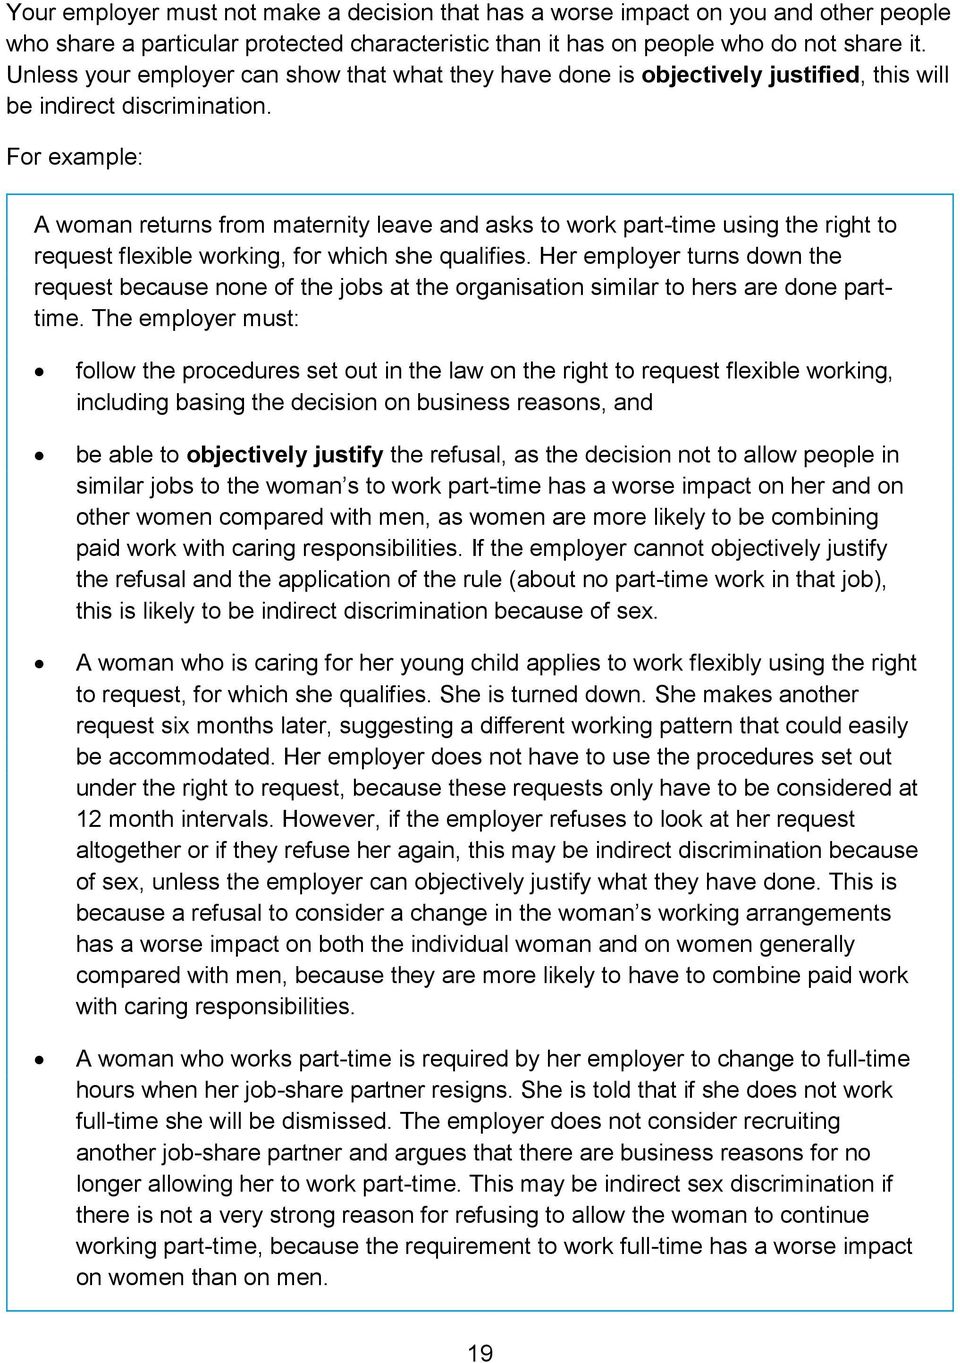 A woman returns from maternity leave and asks to work part-time using the right to request flexible working, for which she qualifies.